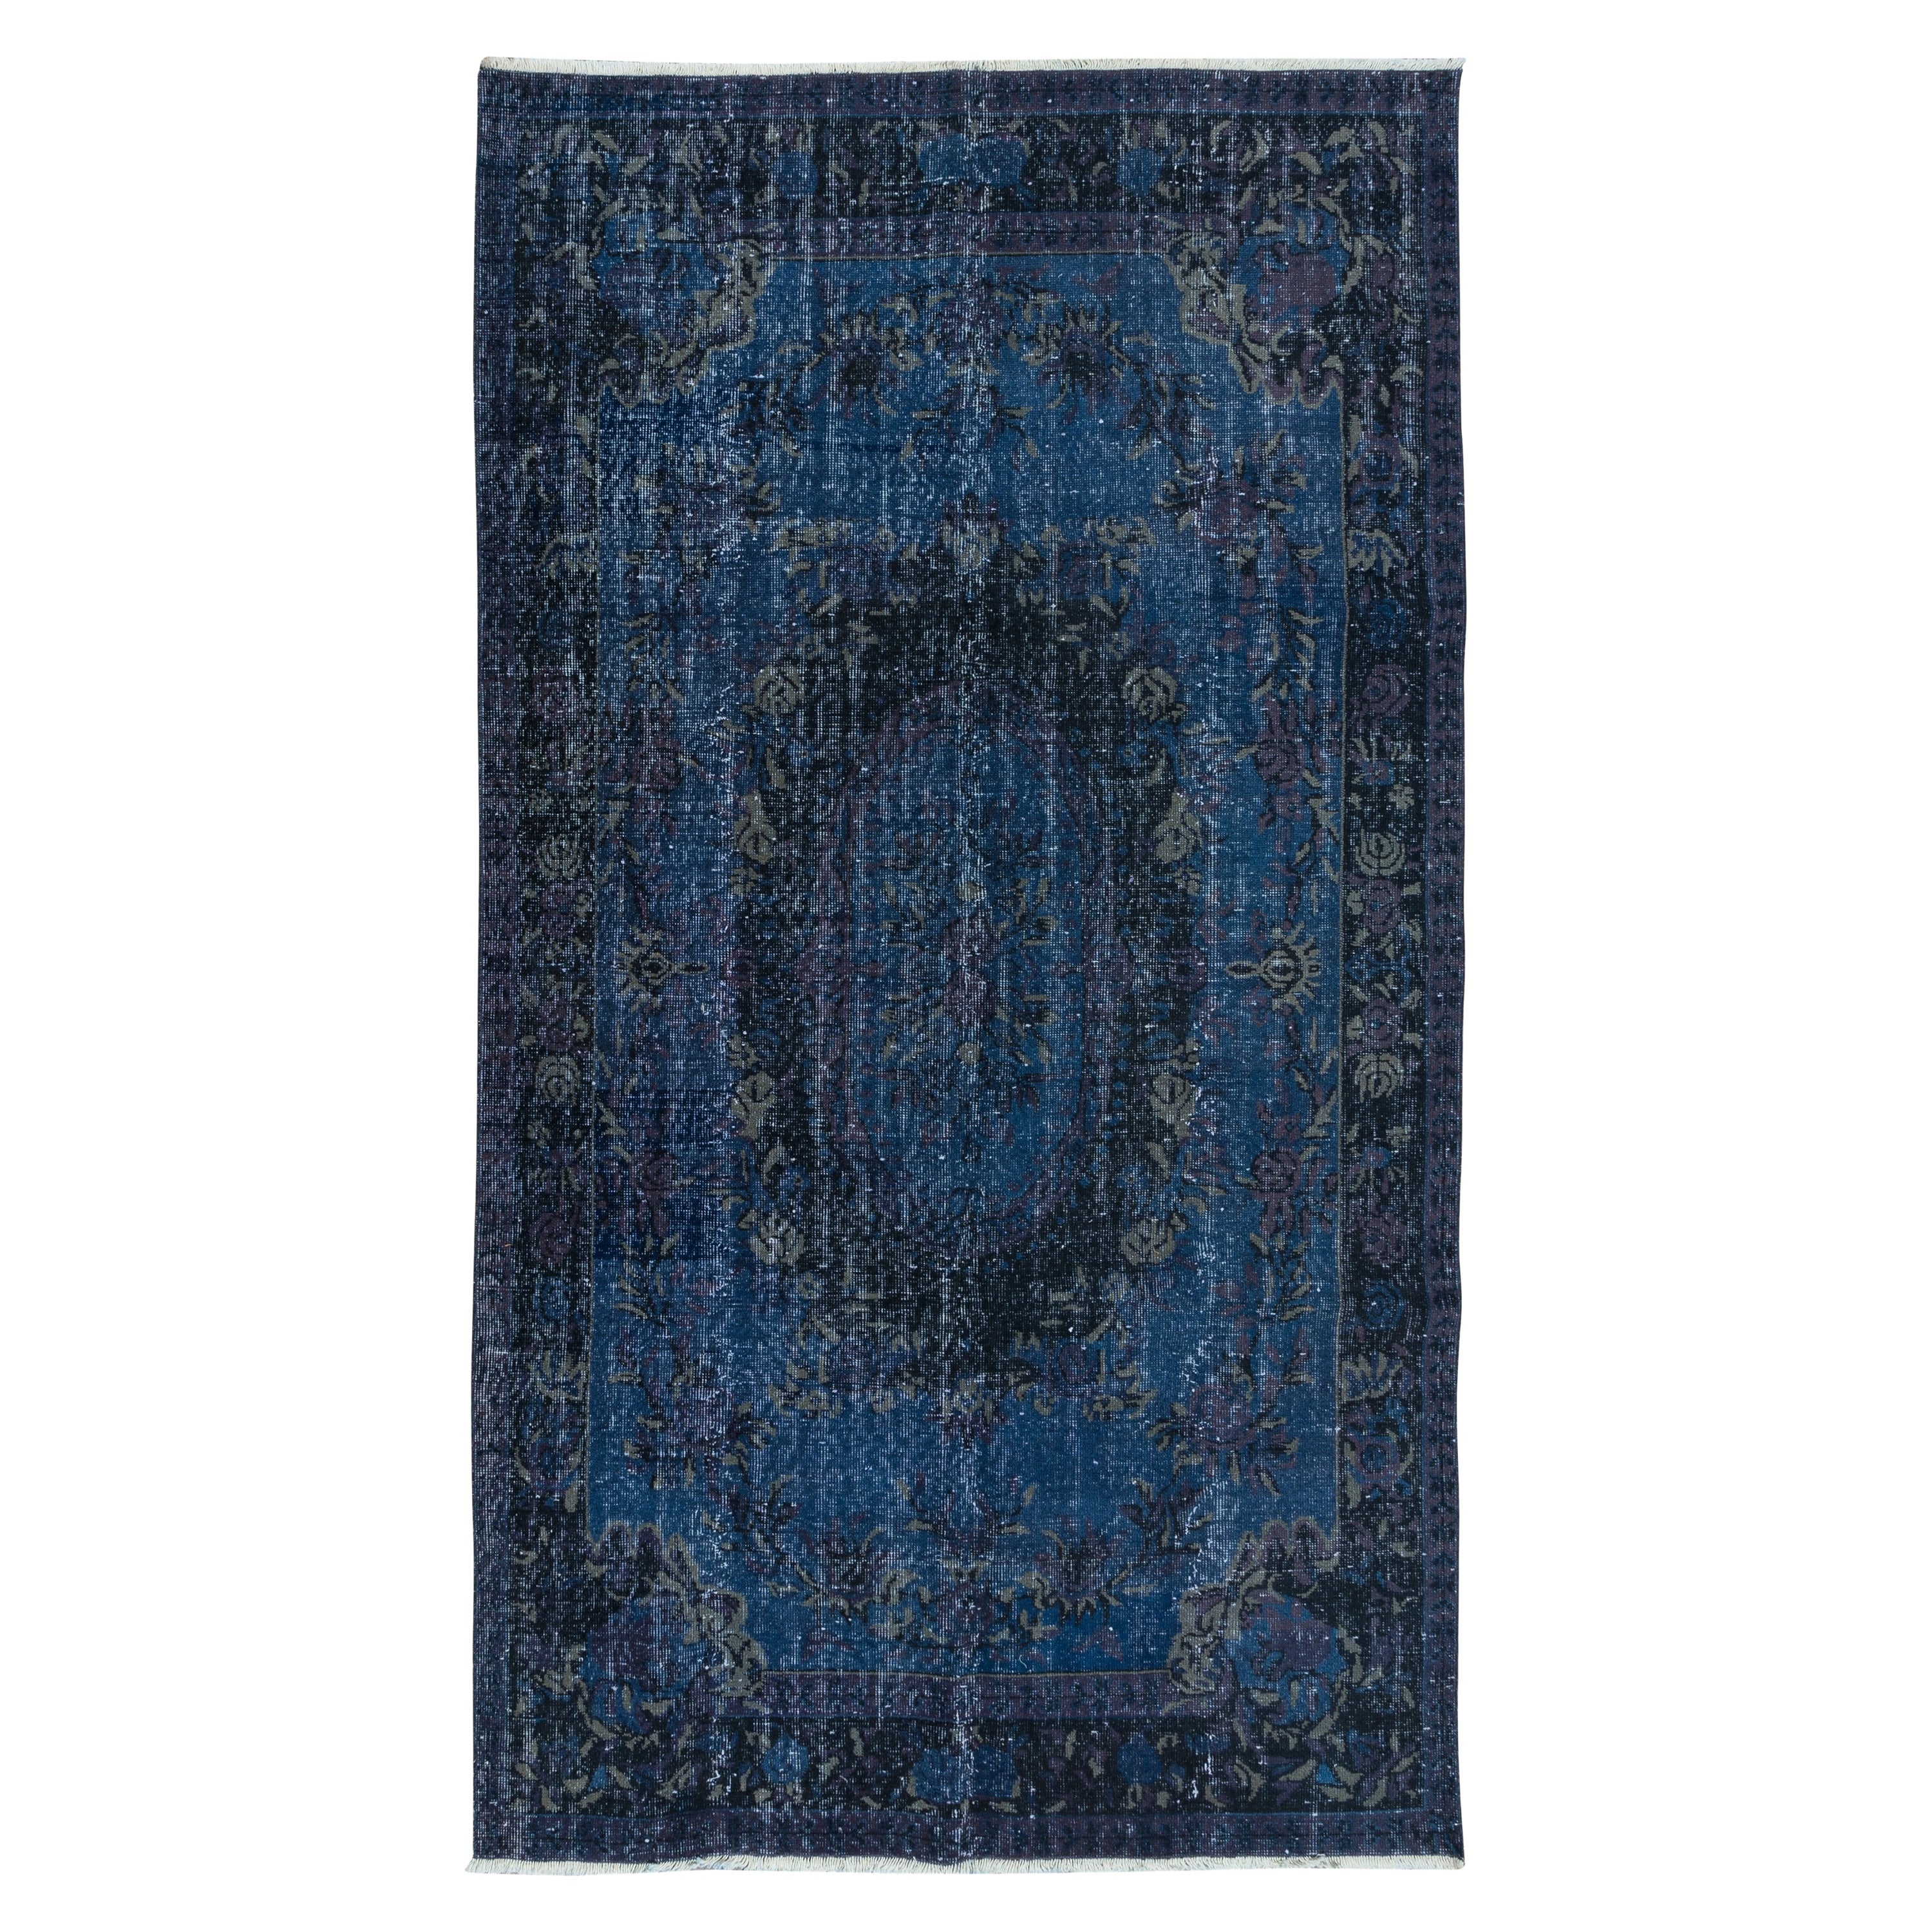 5.7x10.2 Ft French Aubusson Area Rug in Dark Blue, Handmade Turkish Carpet For Sale